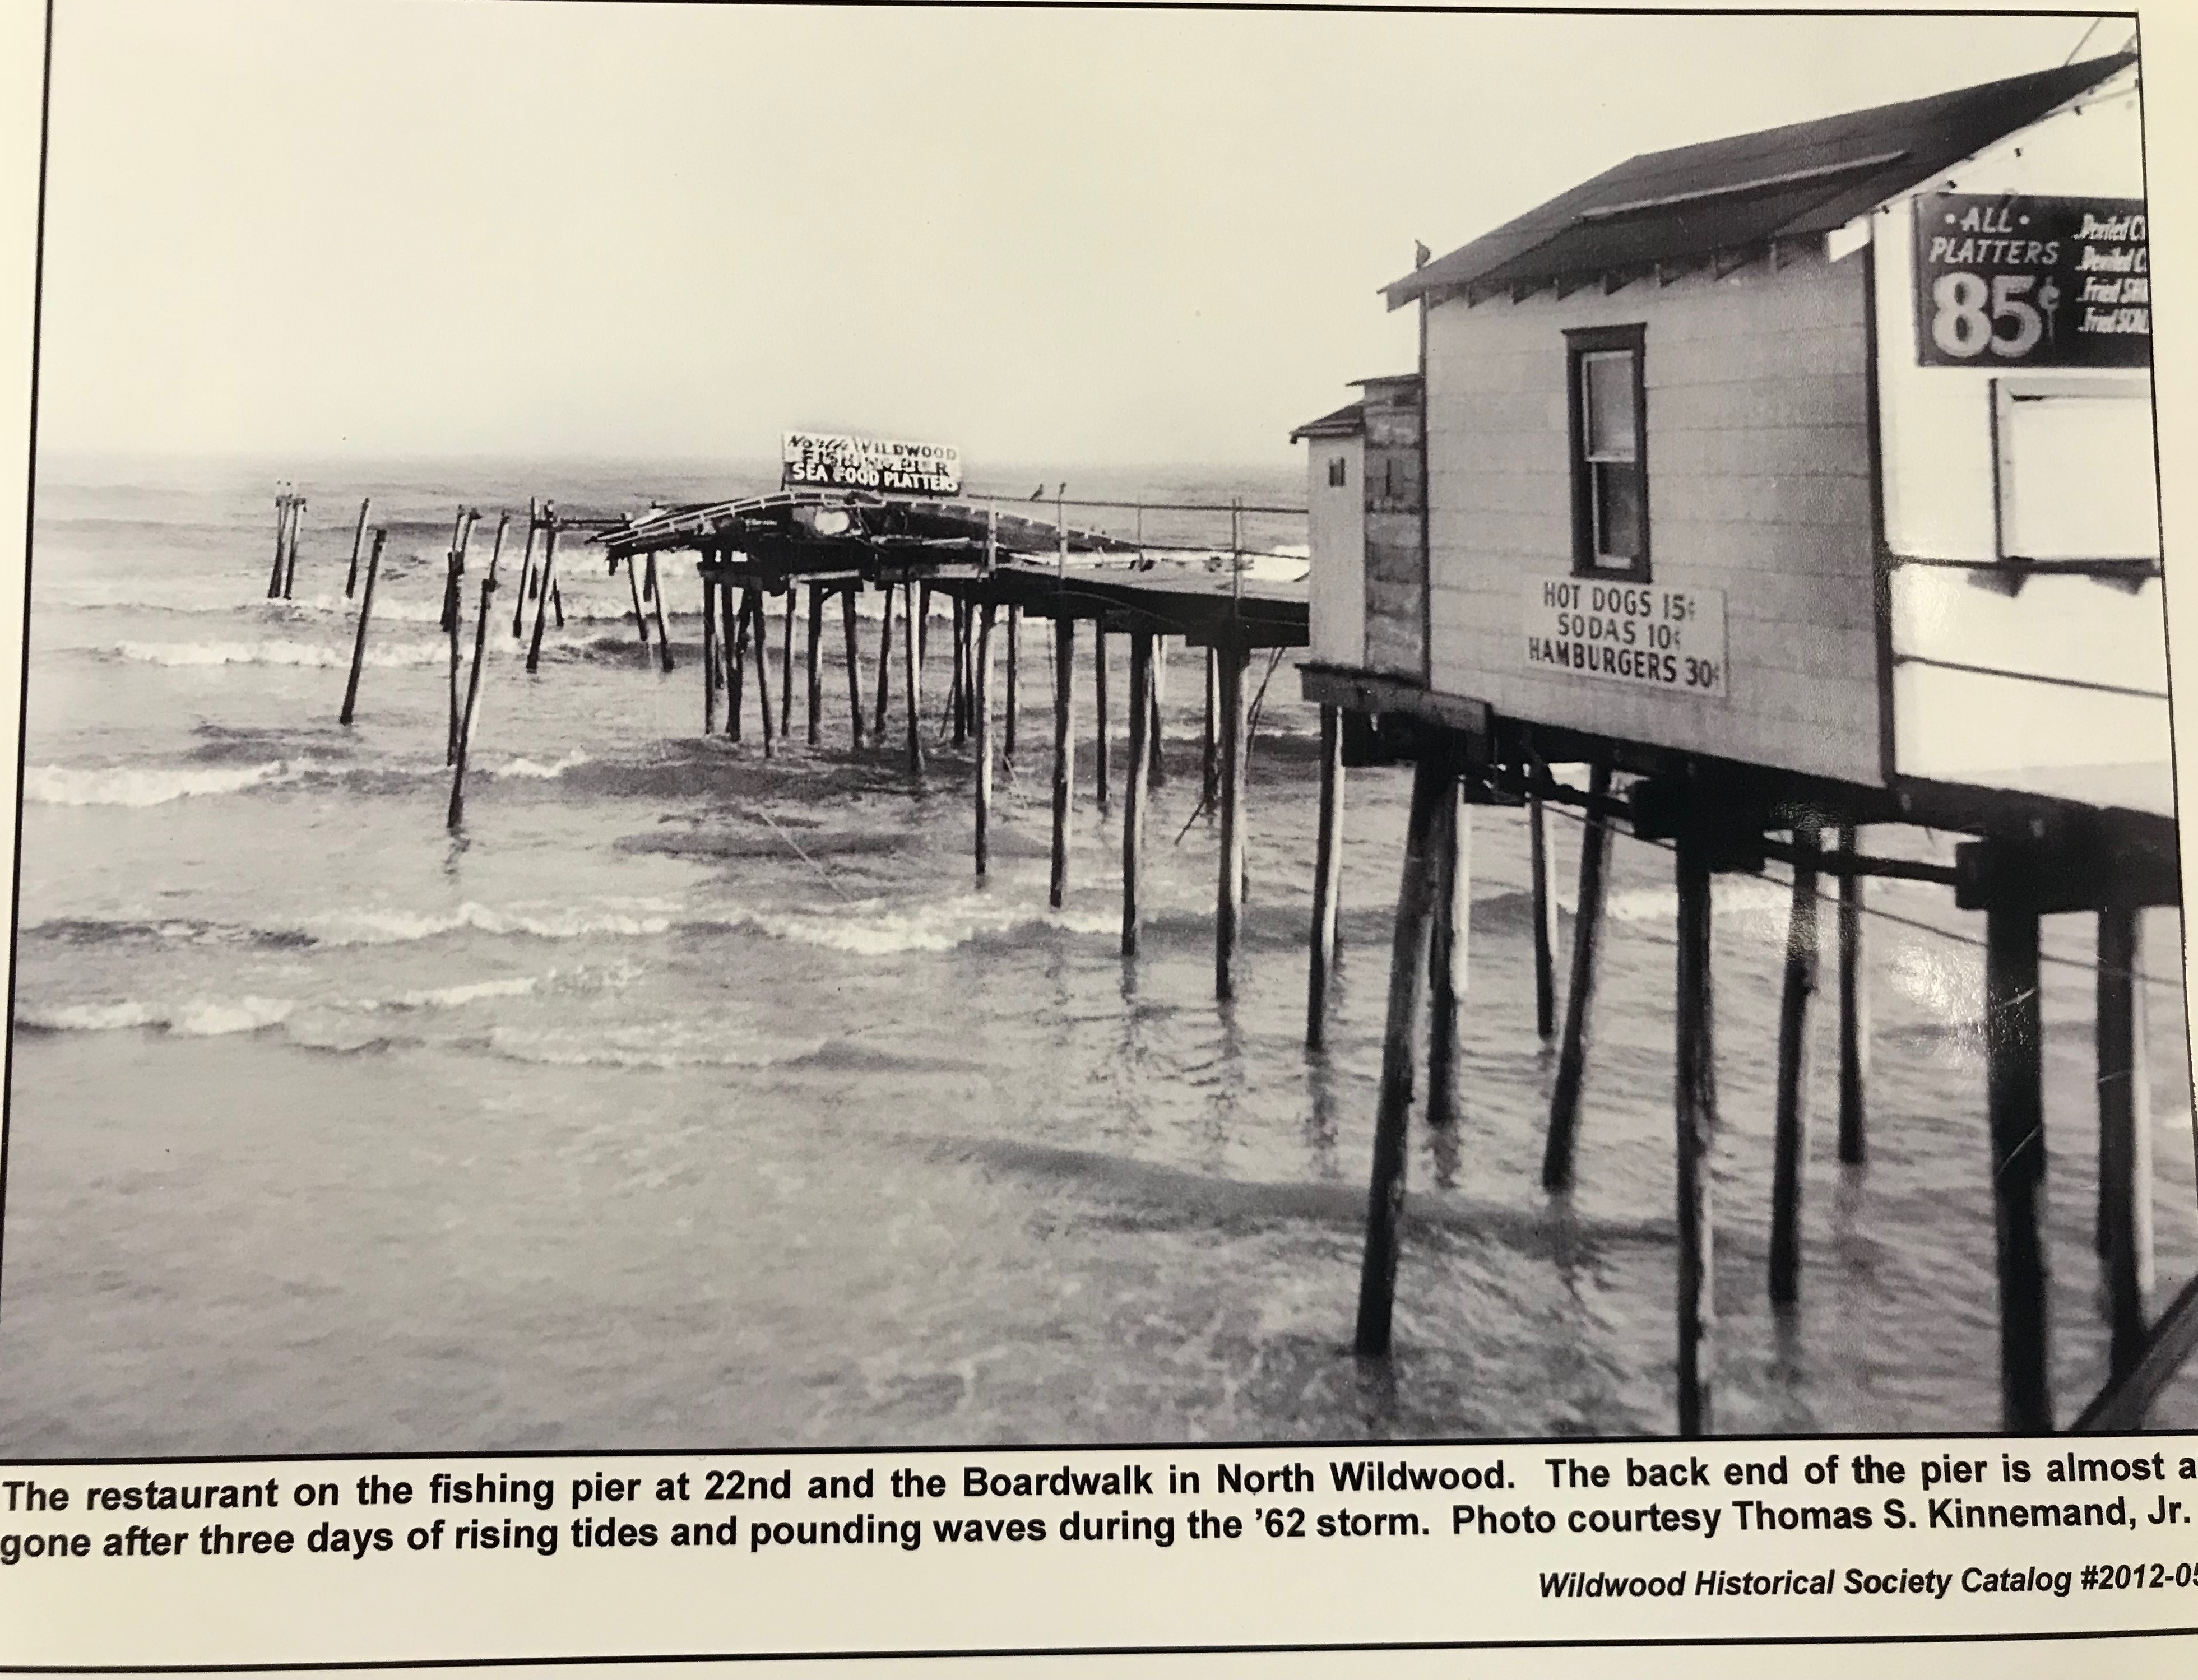 The History and Future of Seaport Pier in North Wildwood, New Jersey